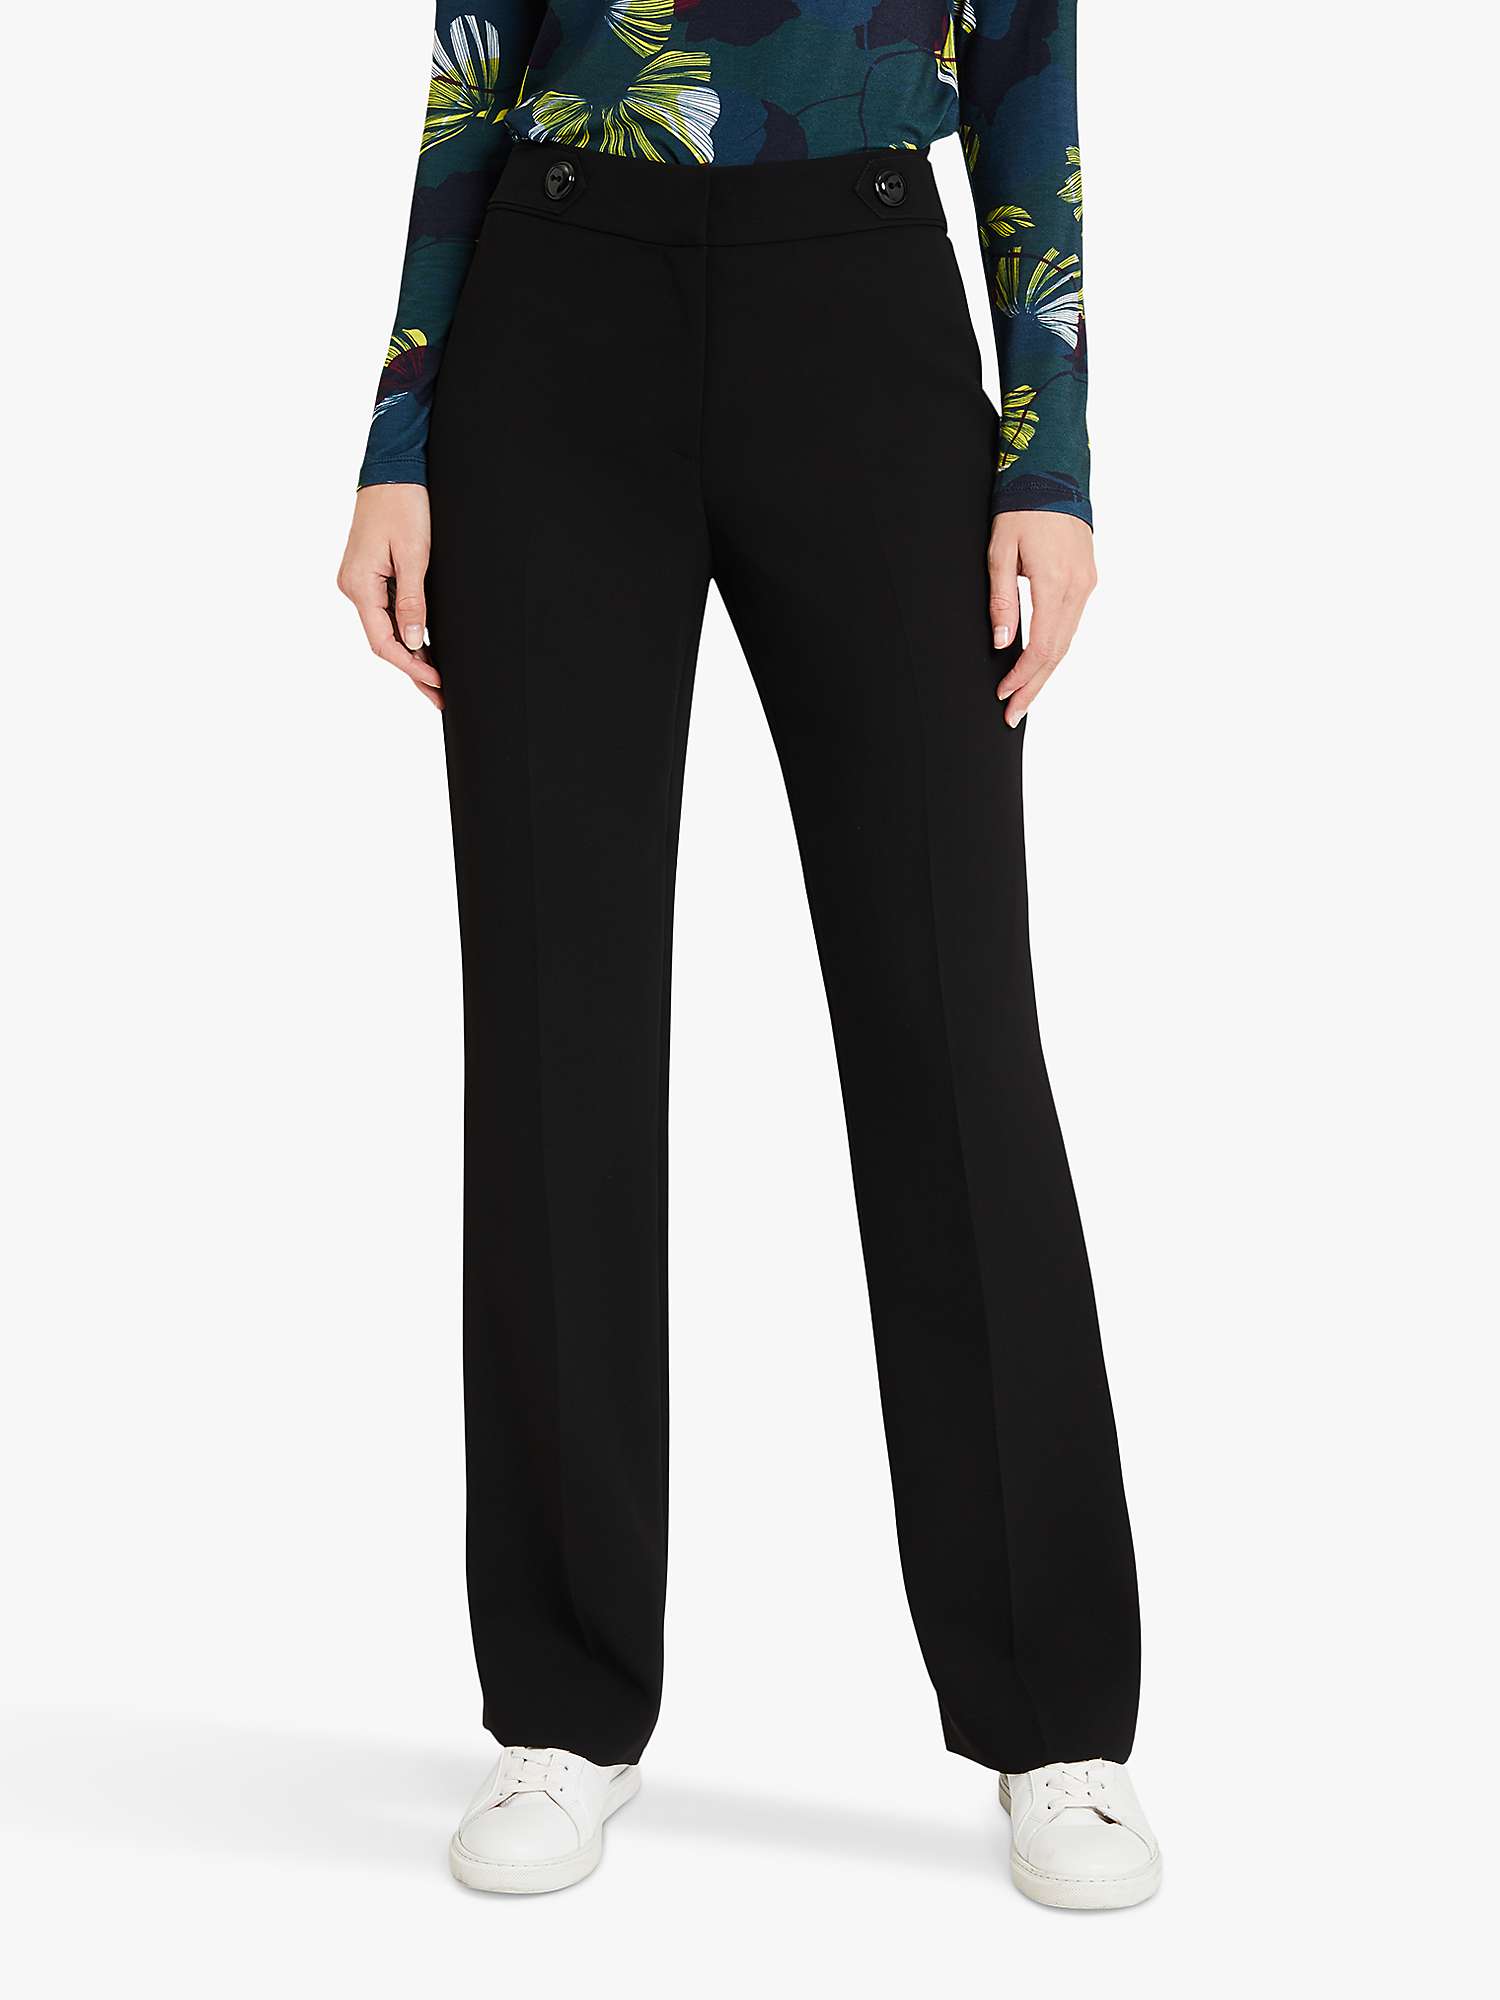 Buy Damsel in a Dress Margot Trousers Online at johnlewis.com